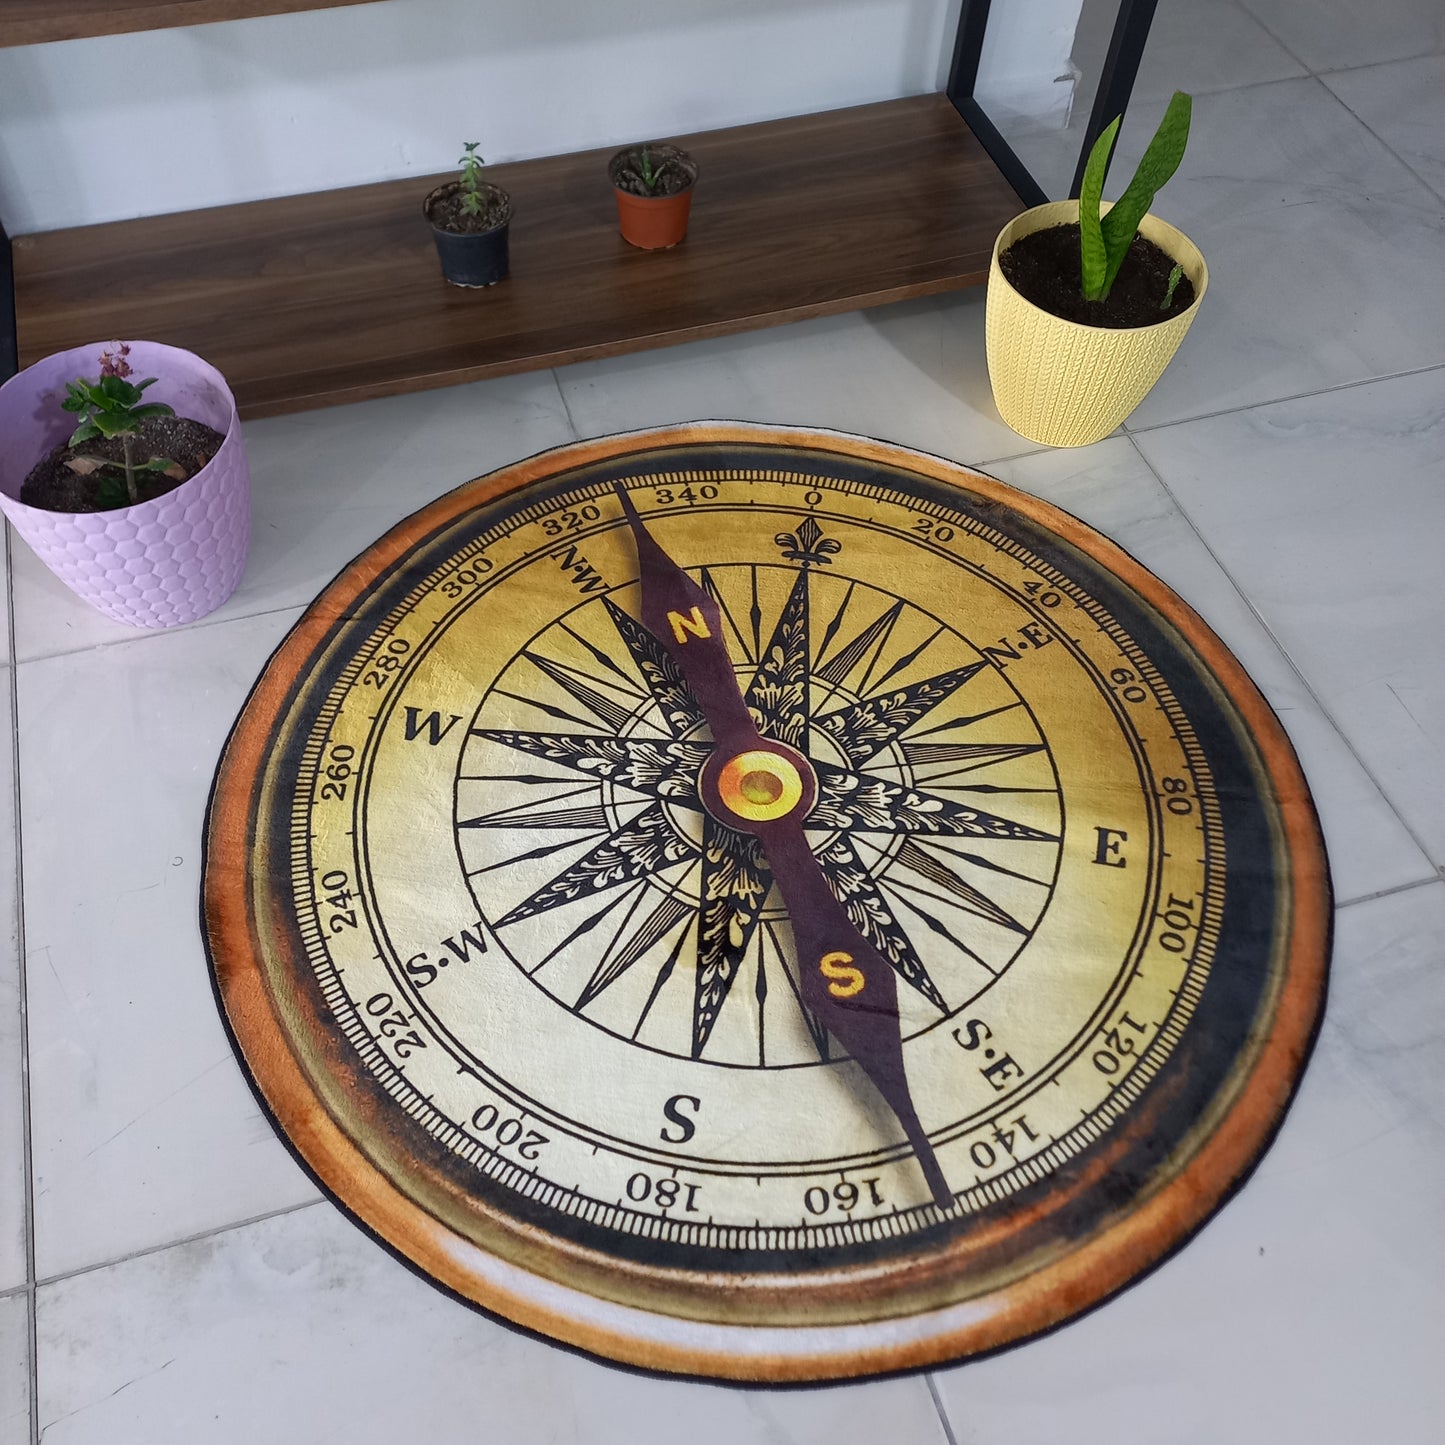 Enhance Your Office Decor with a 3D Compass Rug - Yacht-Inspired Round Mat